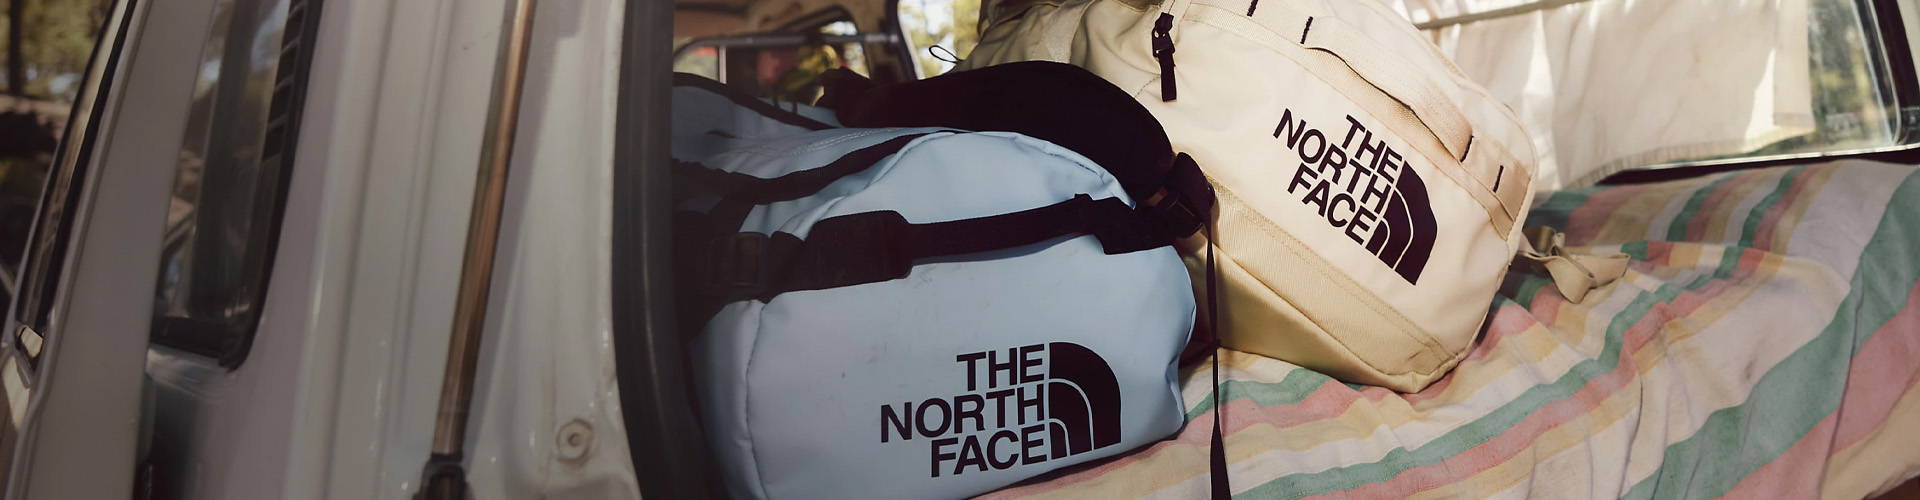 Duffel Bags from The North Face in a camper van.